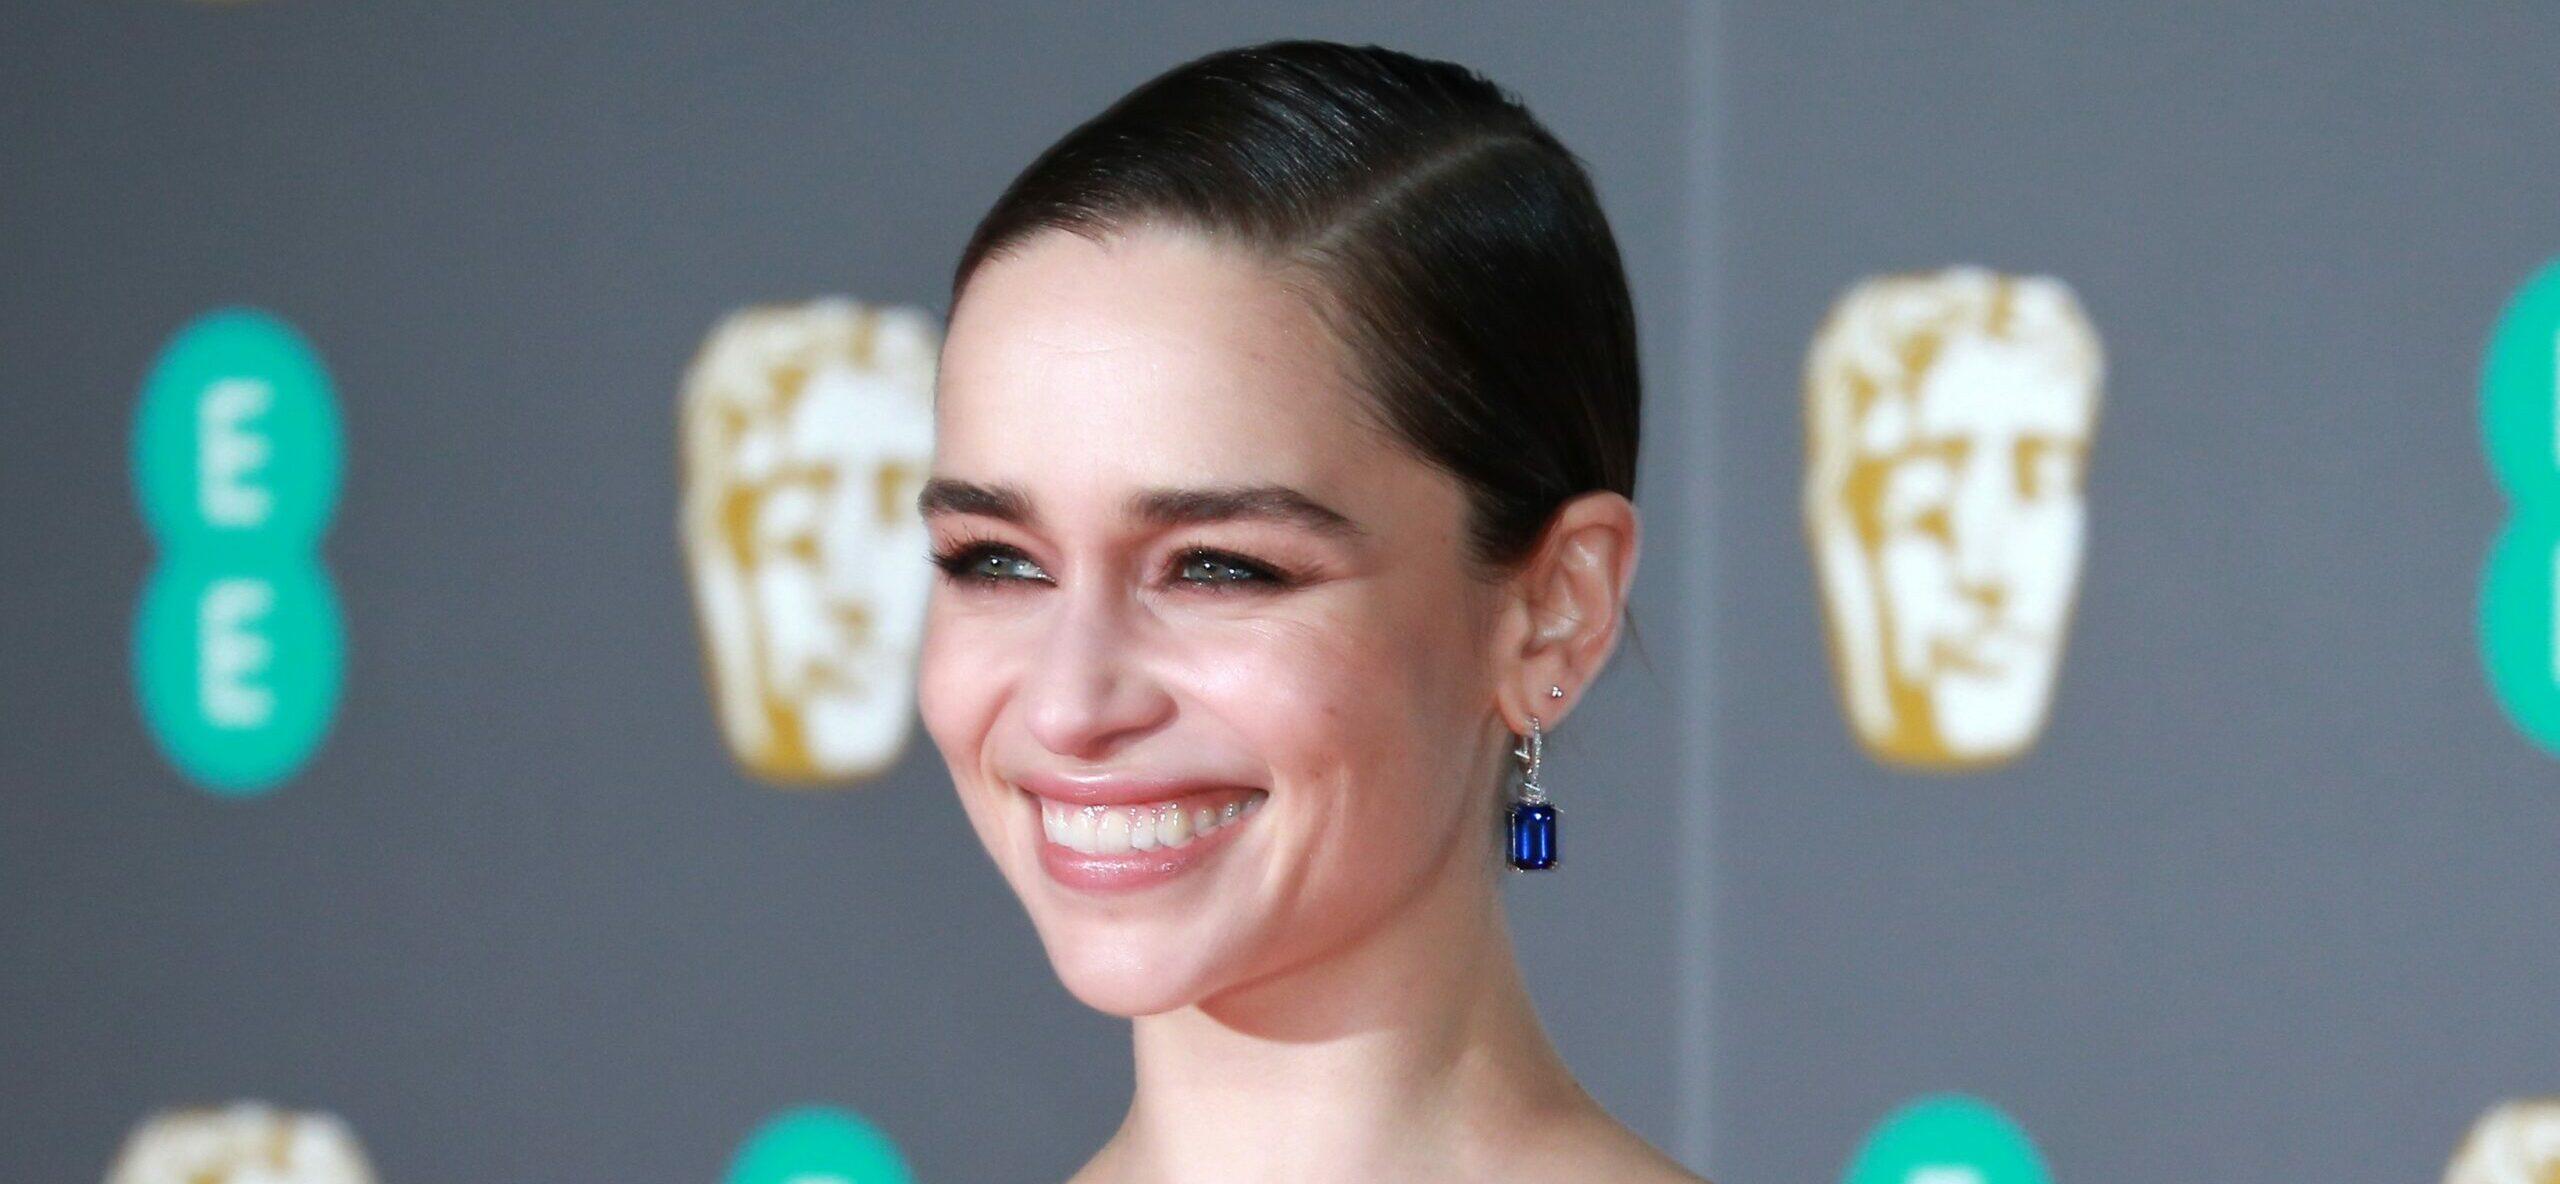 Is Emilia Clarke About To Make An Appearance In An Upcoming ‘Star Wars’ Series?